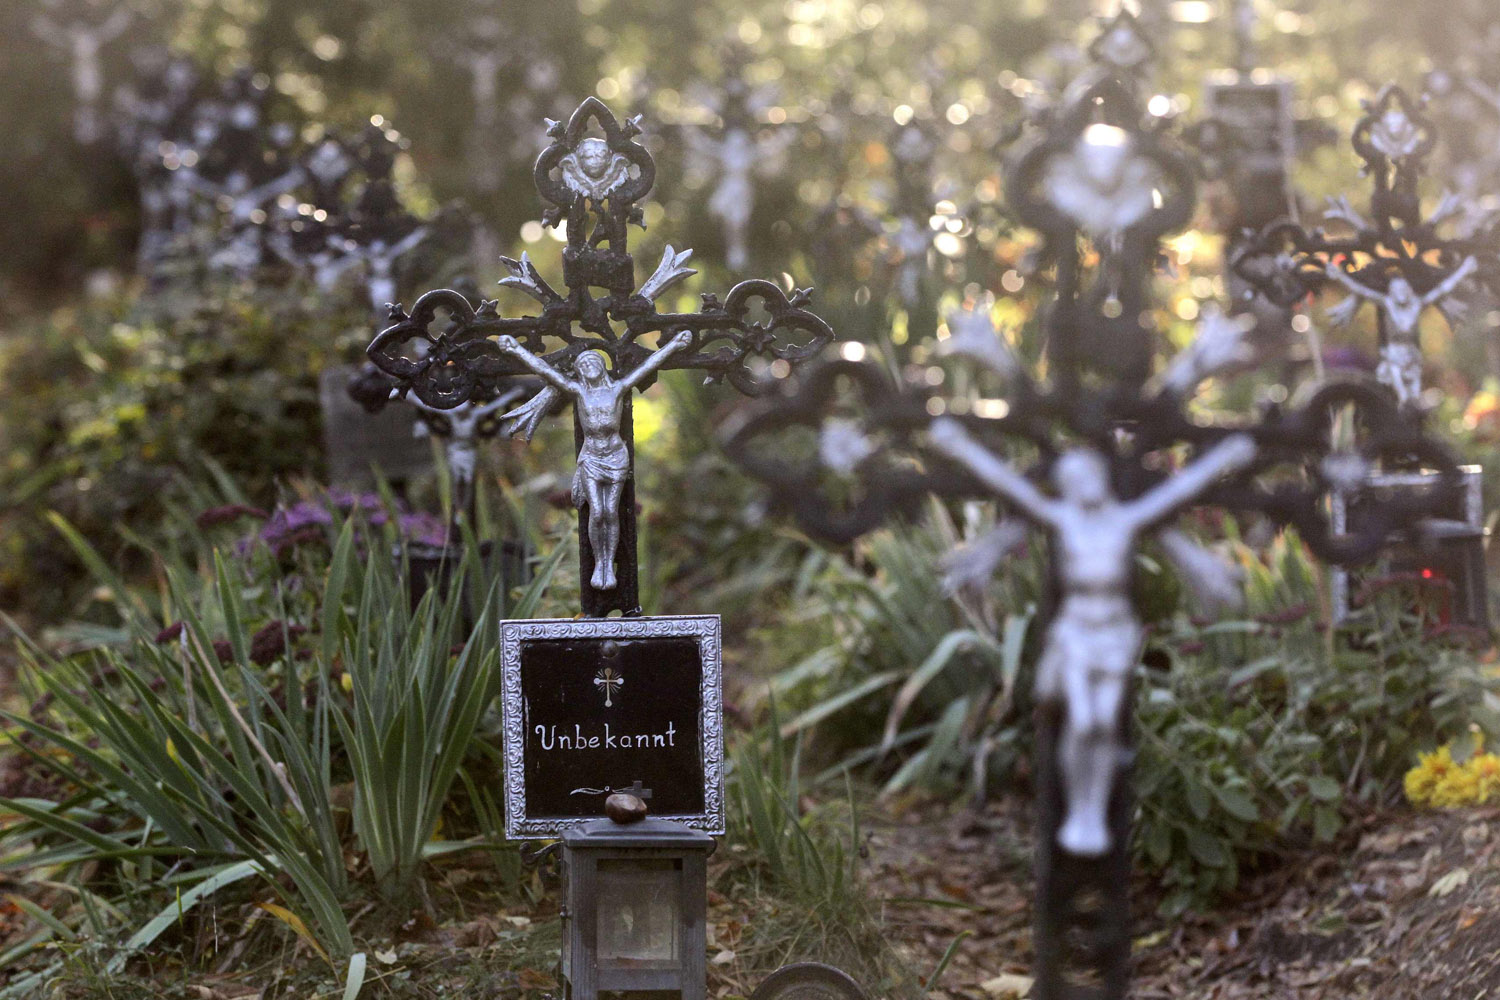 Image: Oct. 31, 2012. Crosses are pictured at the "Friedhof der Namenlosen" (Cemetery of the Anonymous), near the Danube river in Vienna. The graveyard was set up in 1840 for anonymous drowned persons who were found on the Danube river banks.